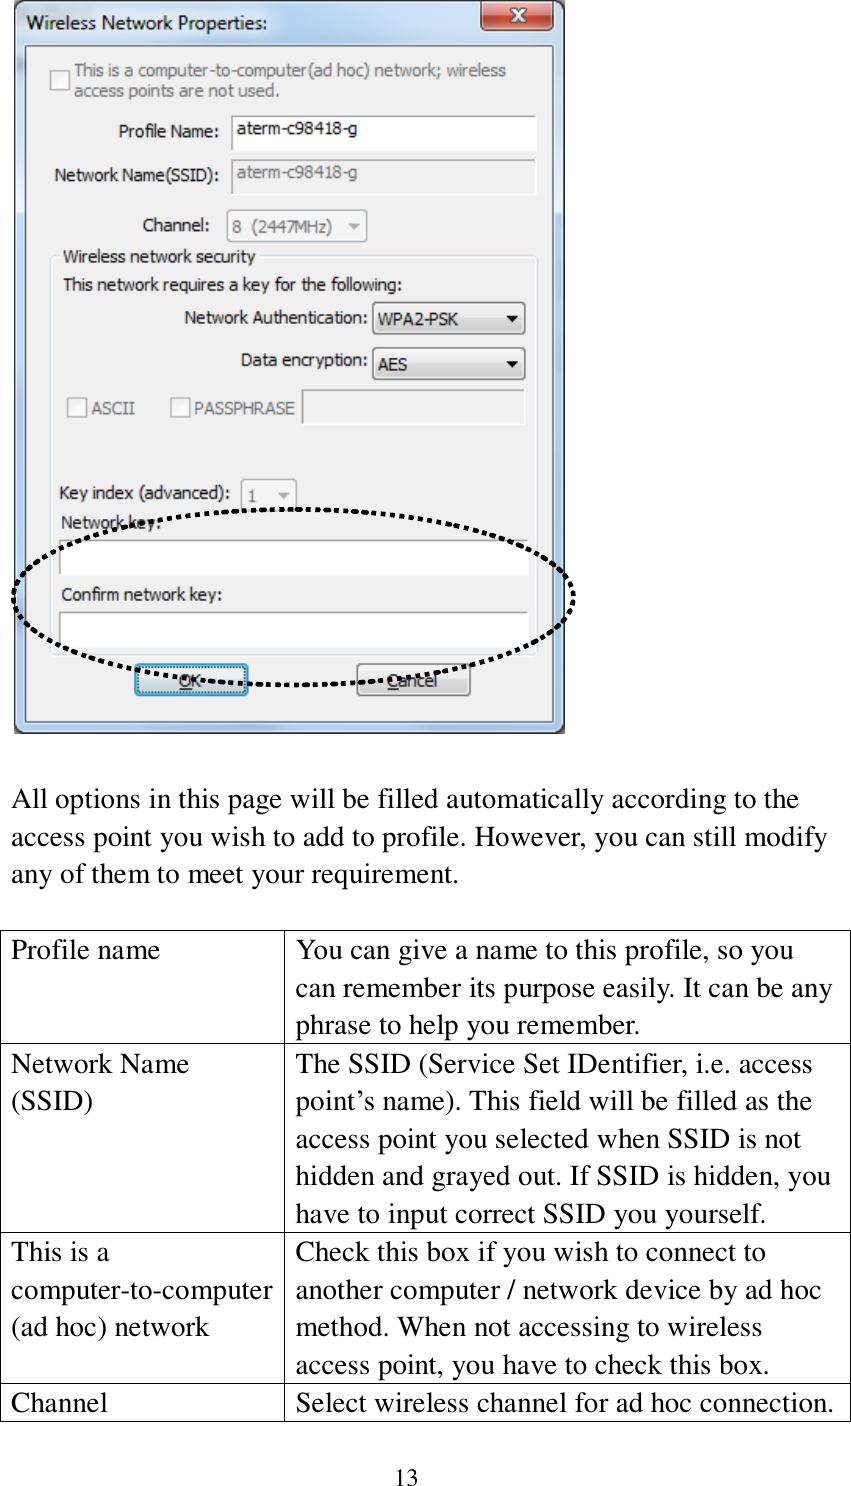  13   All options in this page will be filled automatically according to the access point you wish to add to profile. However, you can still modify any of them to meet your requirement.  Profile name You can give a name to this profile, so you can remember its purpose easily. It can be any phrase to help you remember. Network Name (SSID) The SSID (Service Set IDentifier, i.e. access point’s name). This field will be filled as the access point you selected when SSID is not hidden and grayed out. If SSID is hidden, you have to input correct SSID you yourself. This is a computer-to-computer (ad hoc) network Check this box if you wish to connect to another computer / network device by ad hoc method. When not accessing to wireless access point, you have to check this box. Channel Select wireless channel for ad hoc connection. 